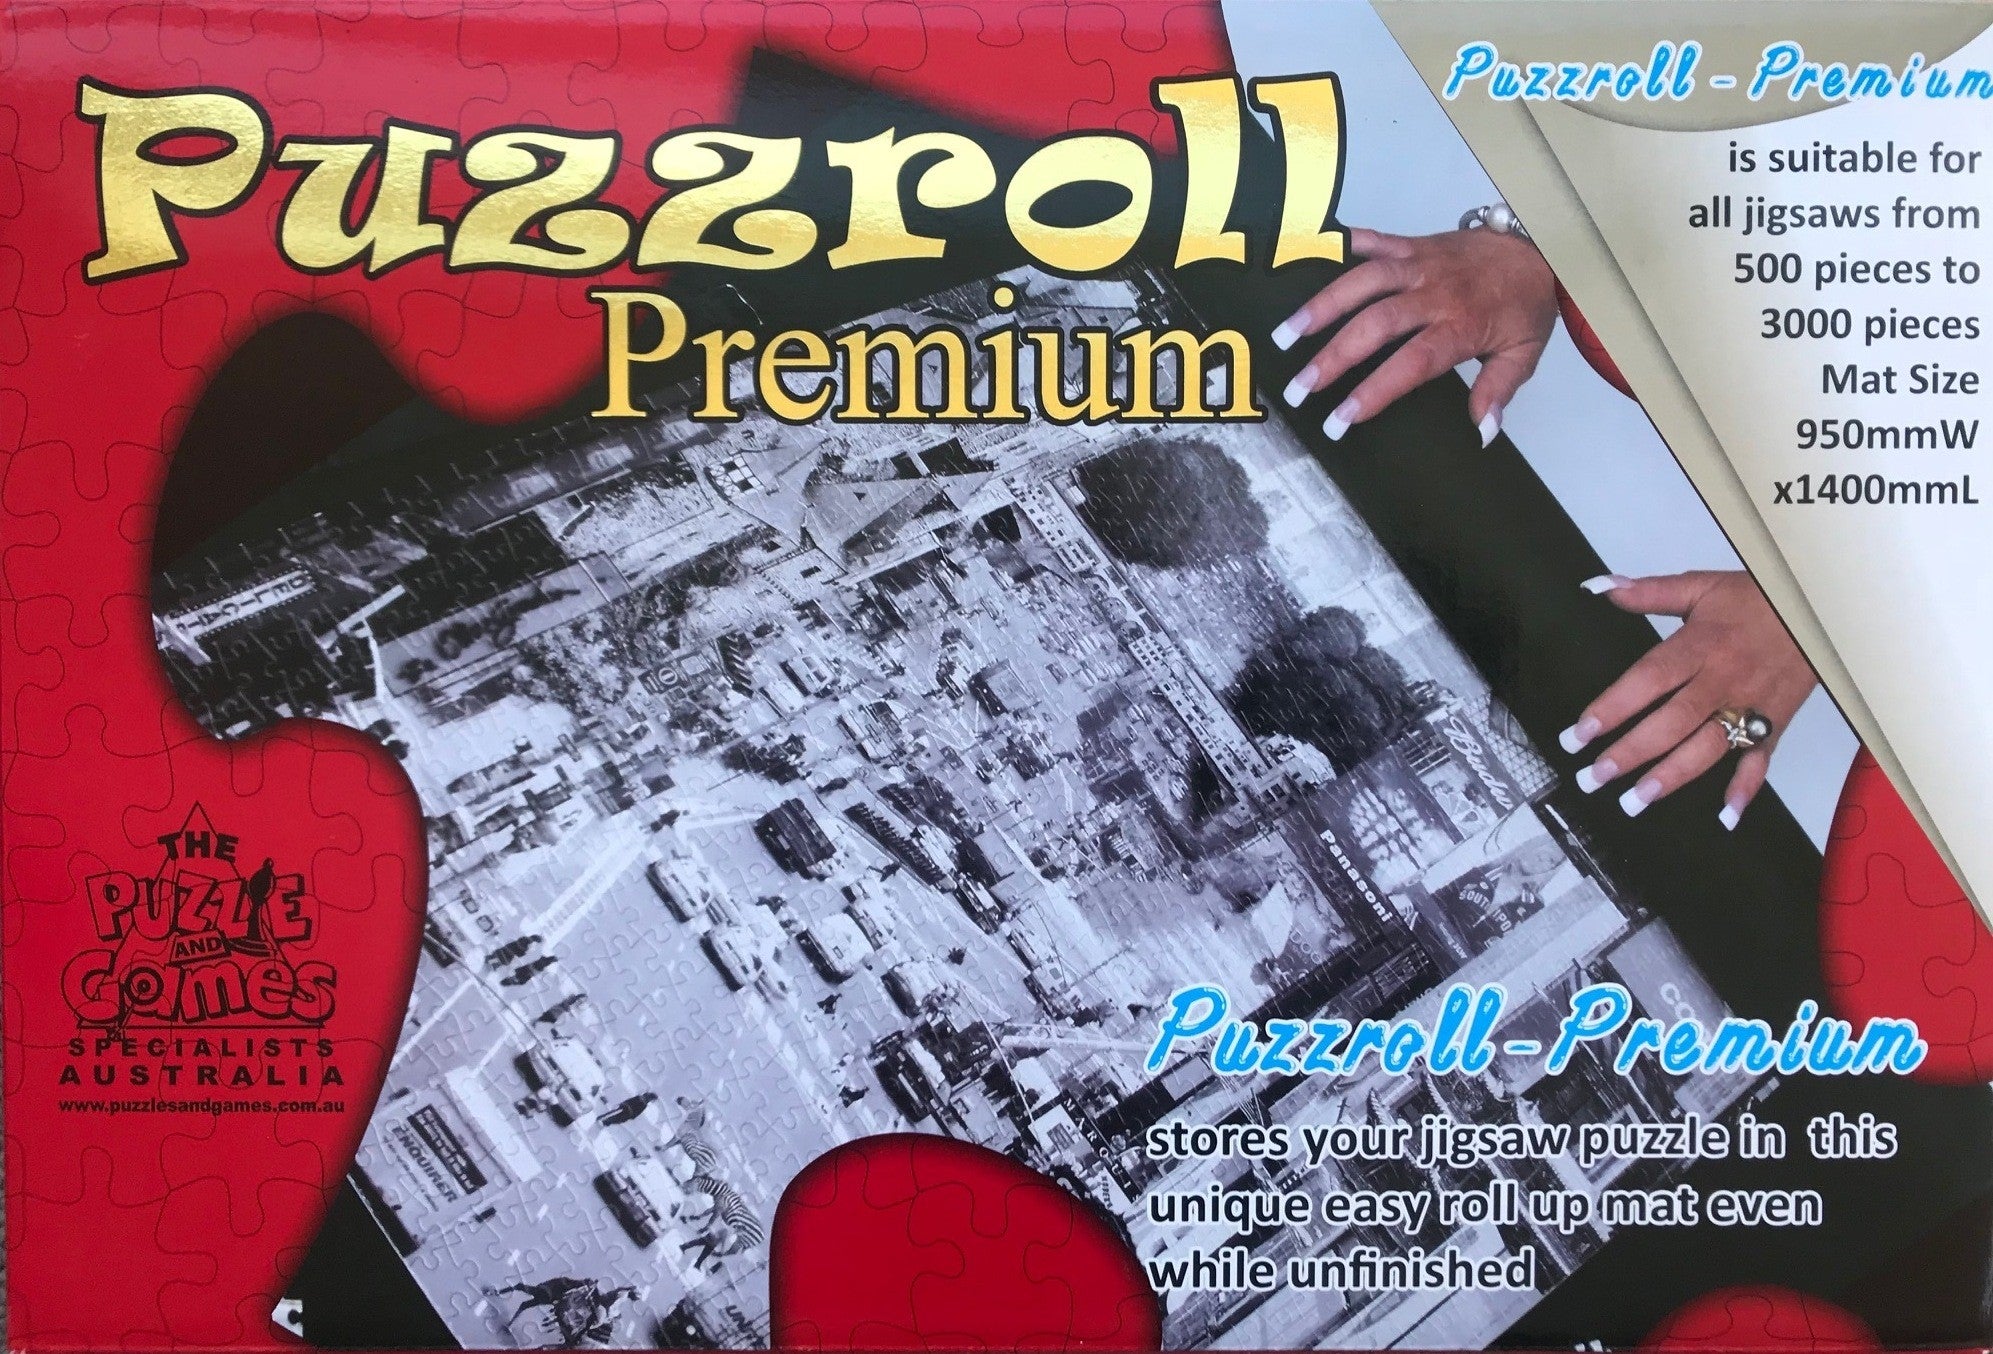 Puzzroll Premium Up To 3000Pc